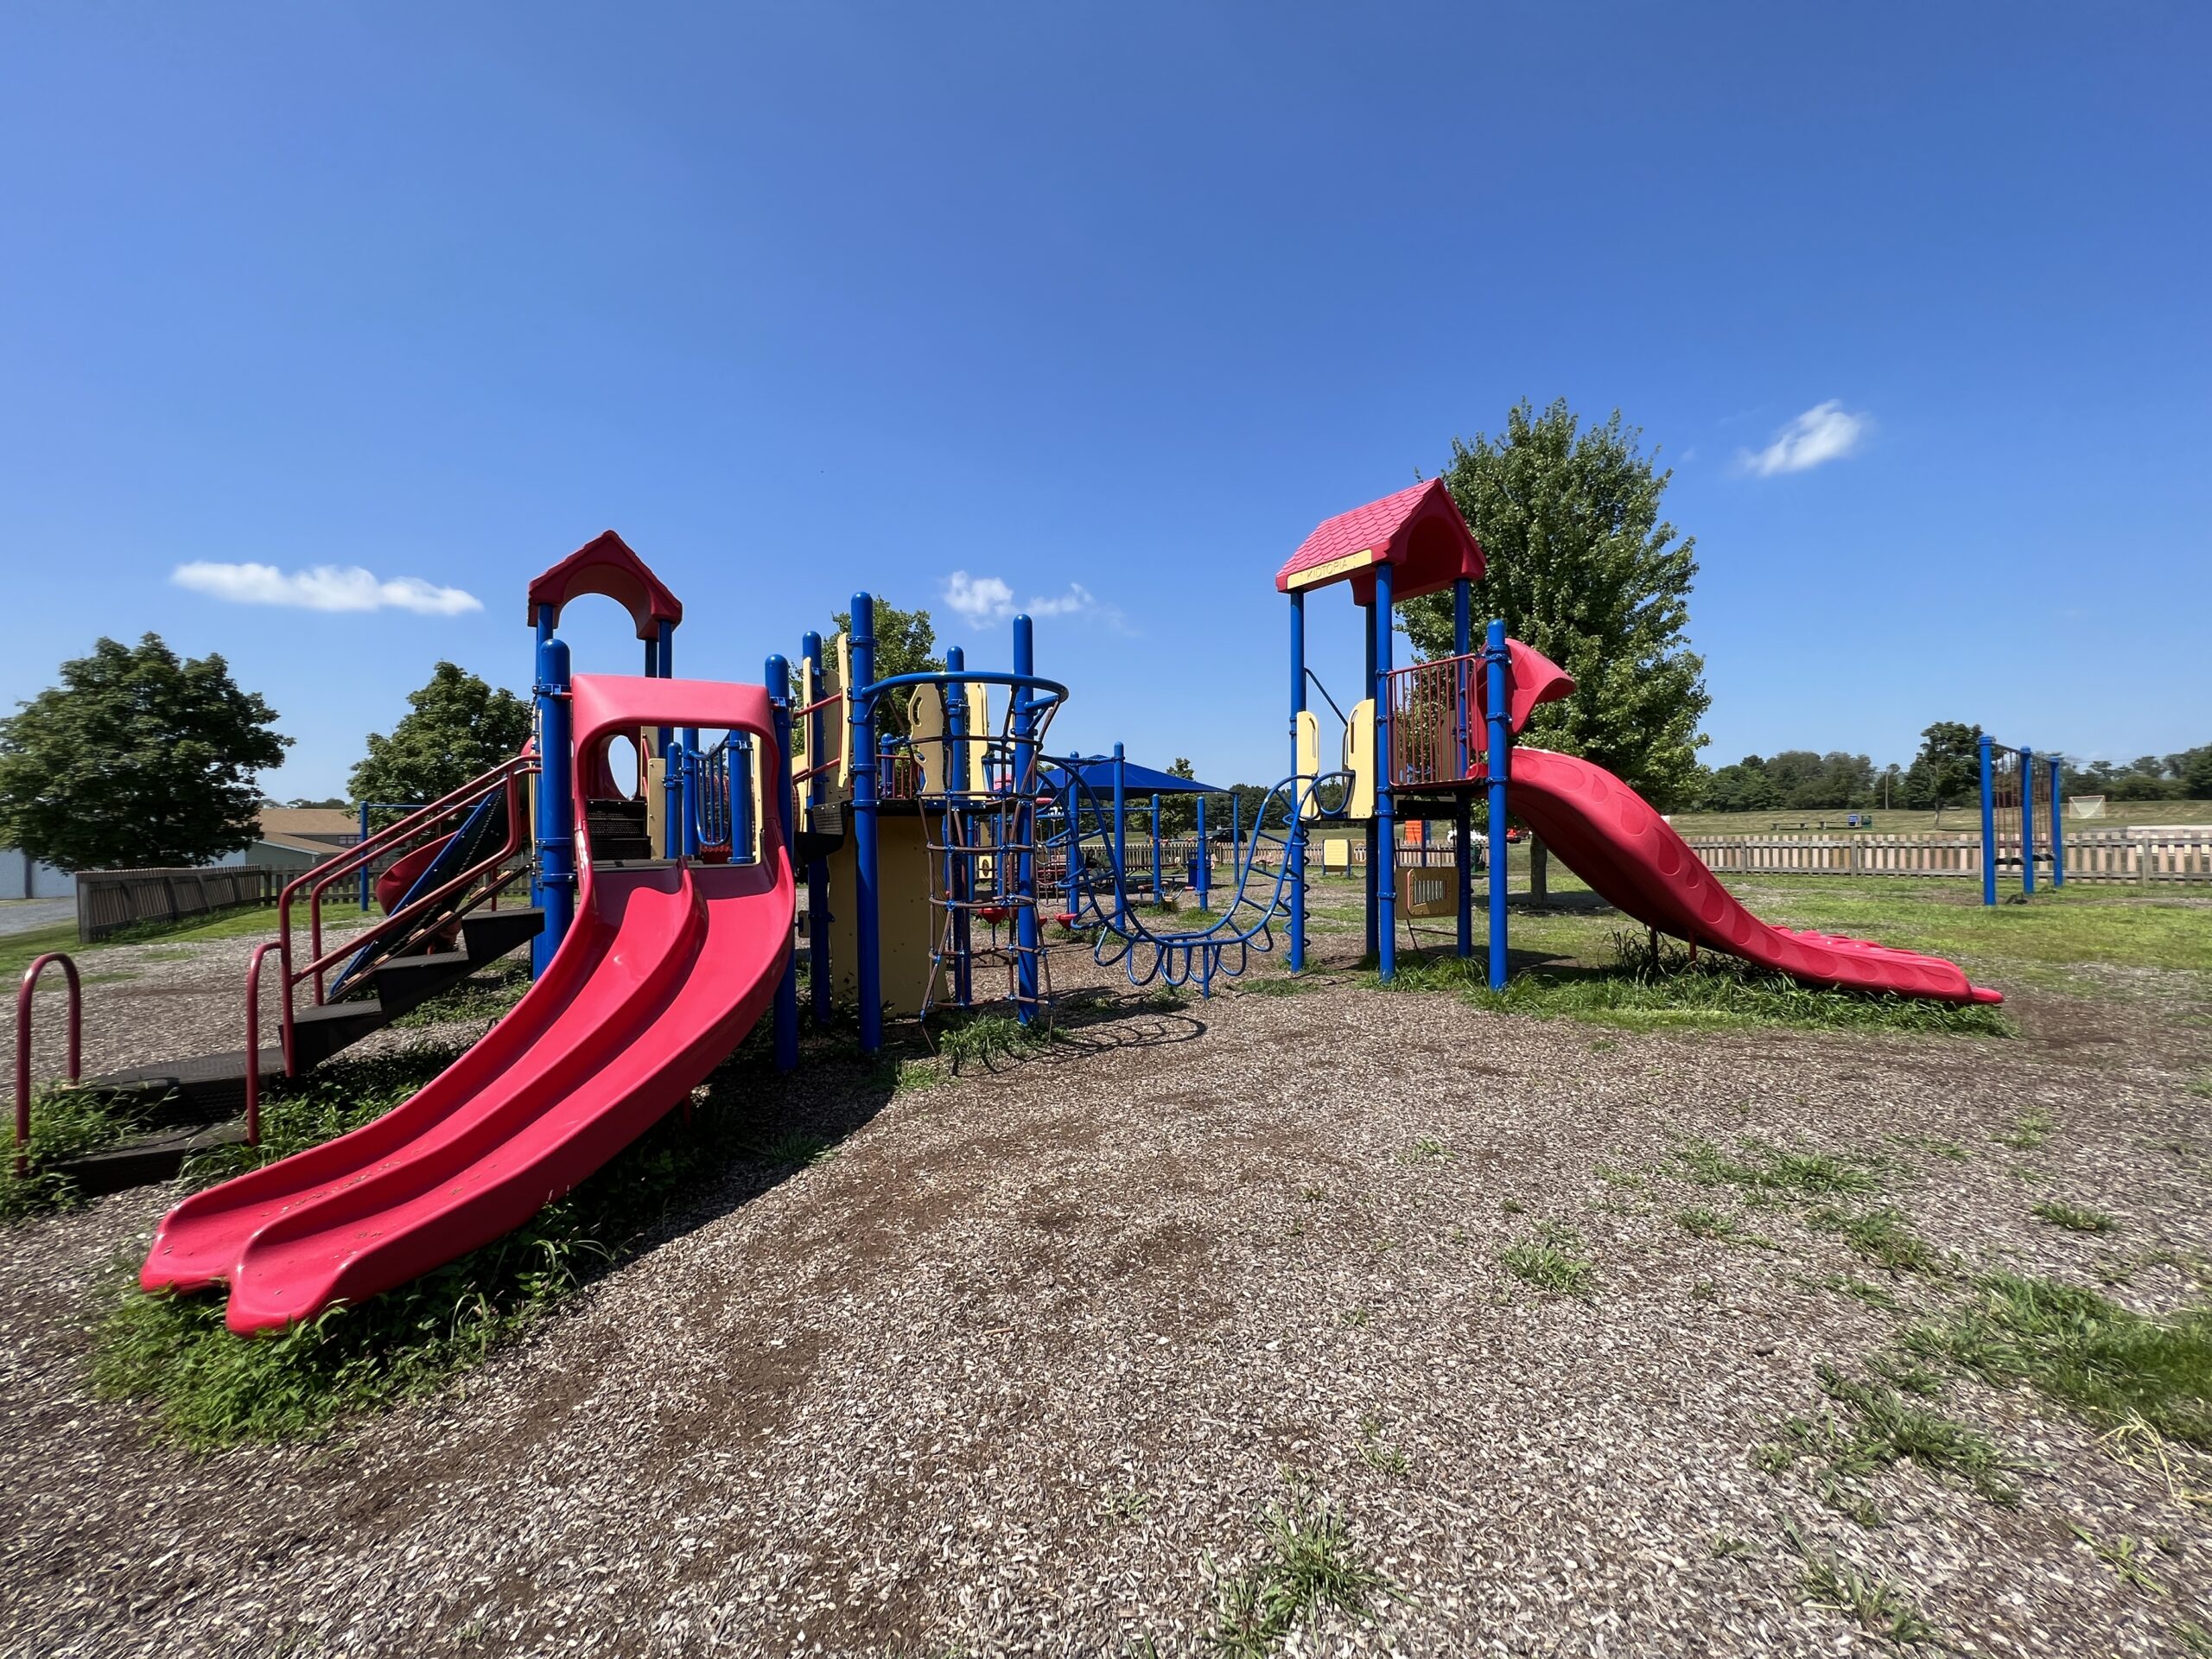 Alexandria Township Park Playground in Milford NJ - WIDE image - large playground